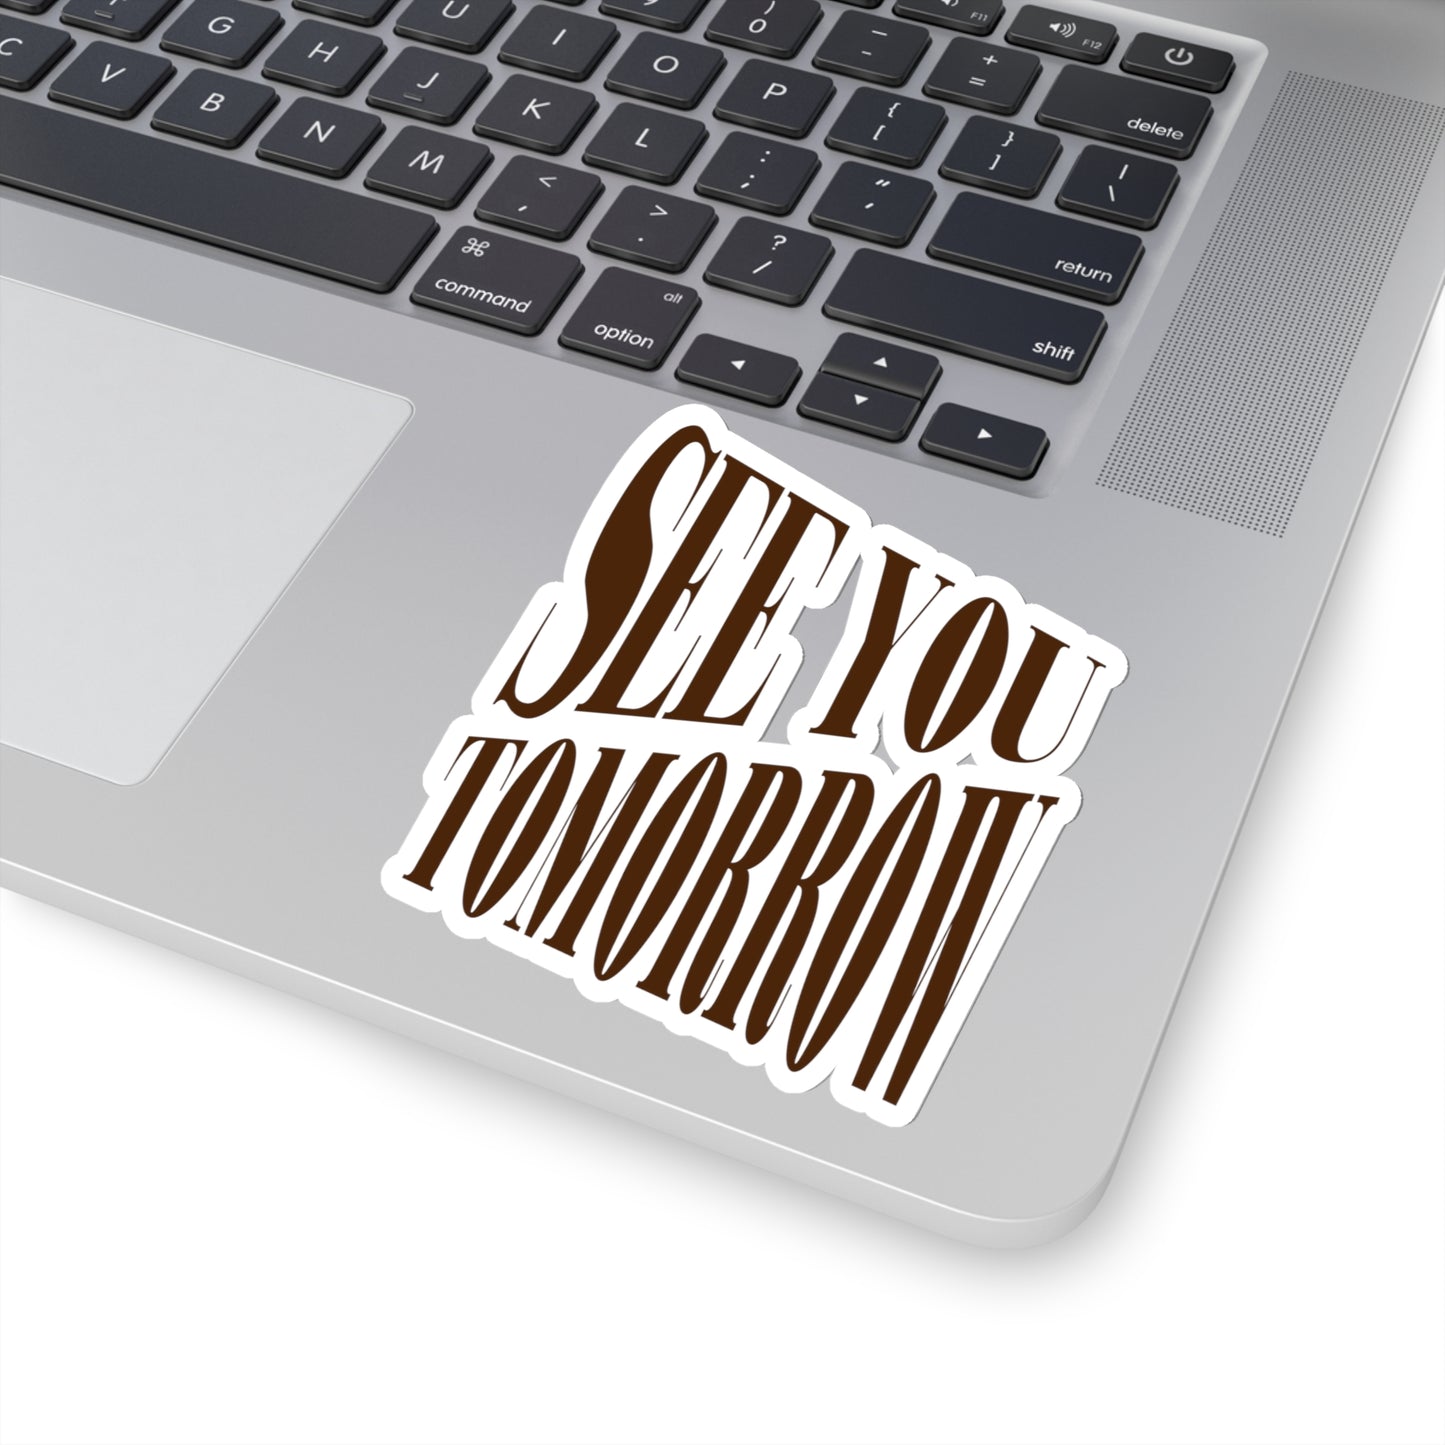 See You Tomorrow Stickers